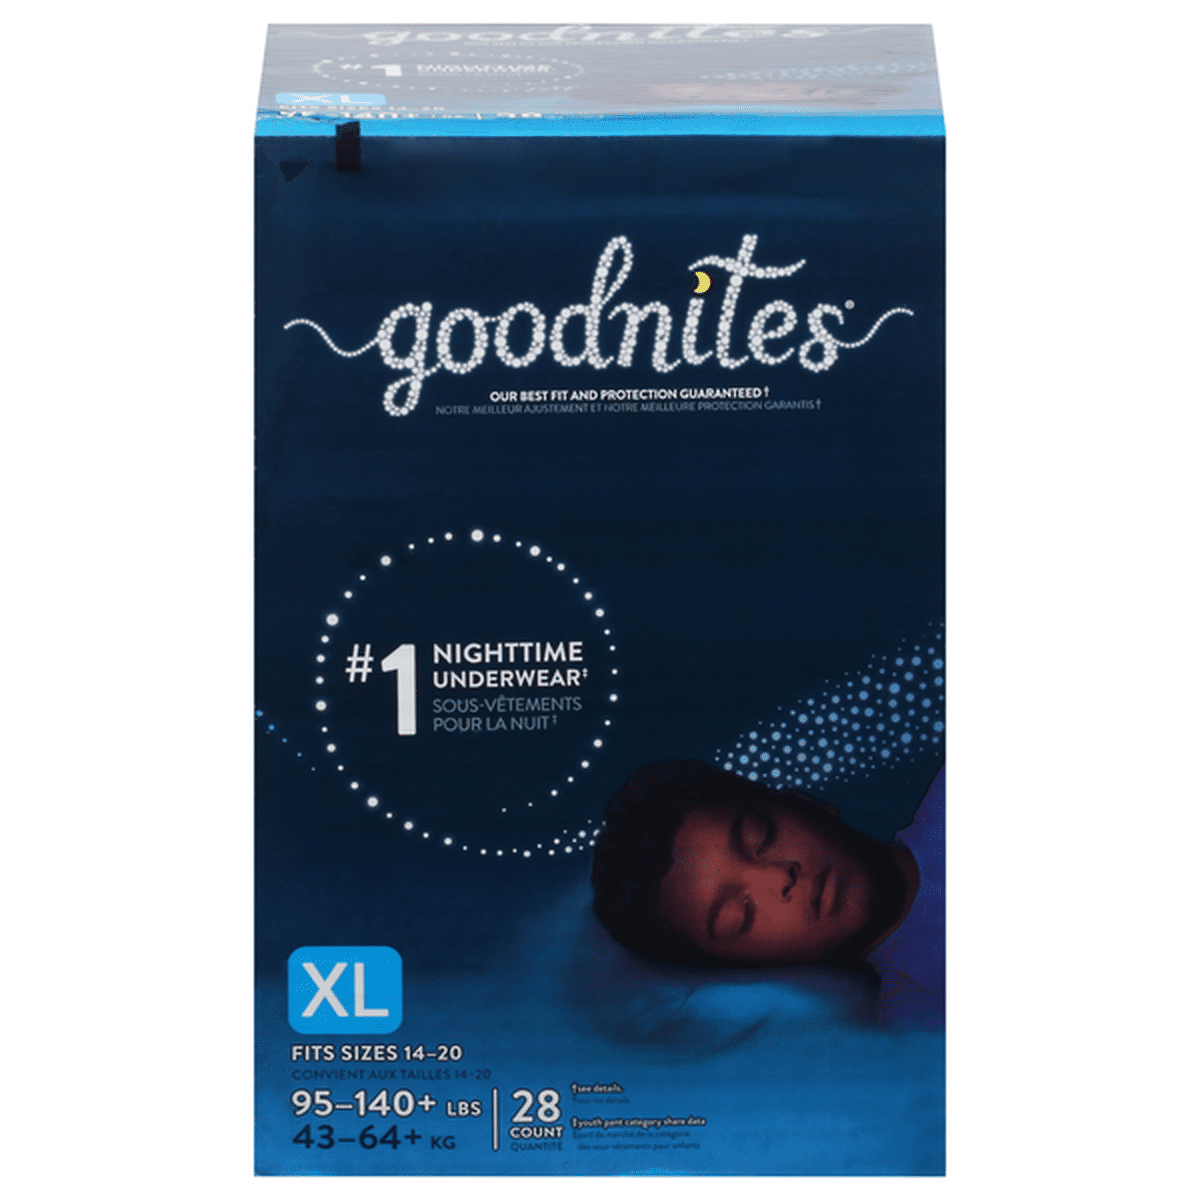 Goodnites Boys' Nighttime Bedwetting Underwear, Size Extra Large (95-140+  lbs)